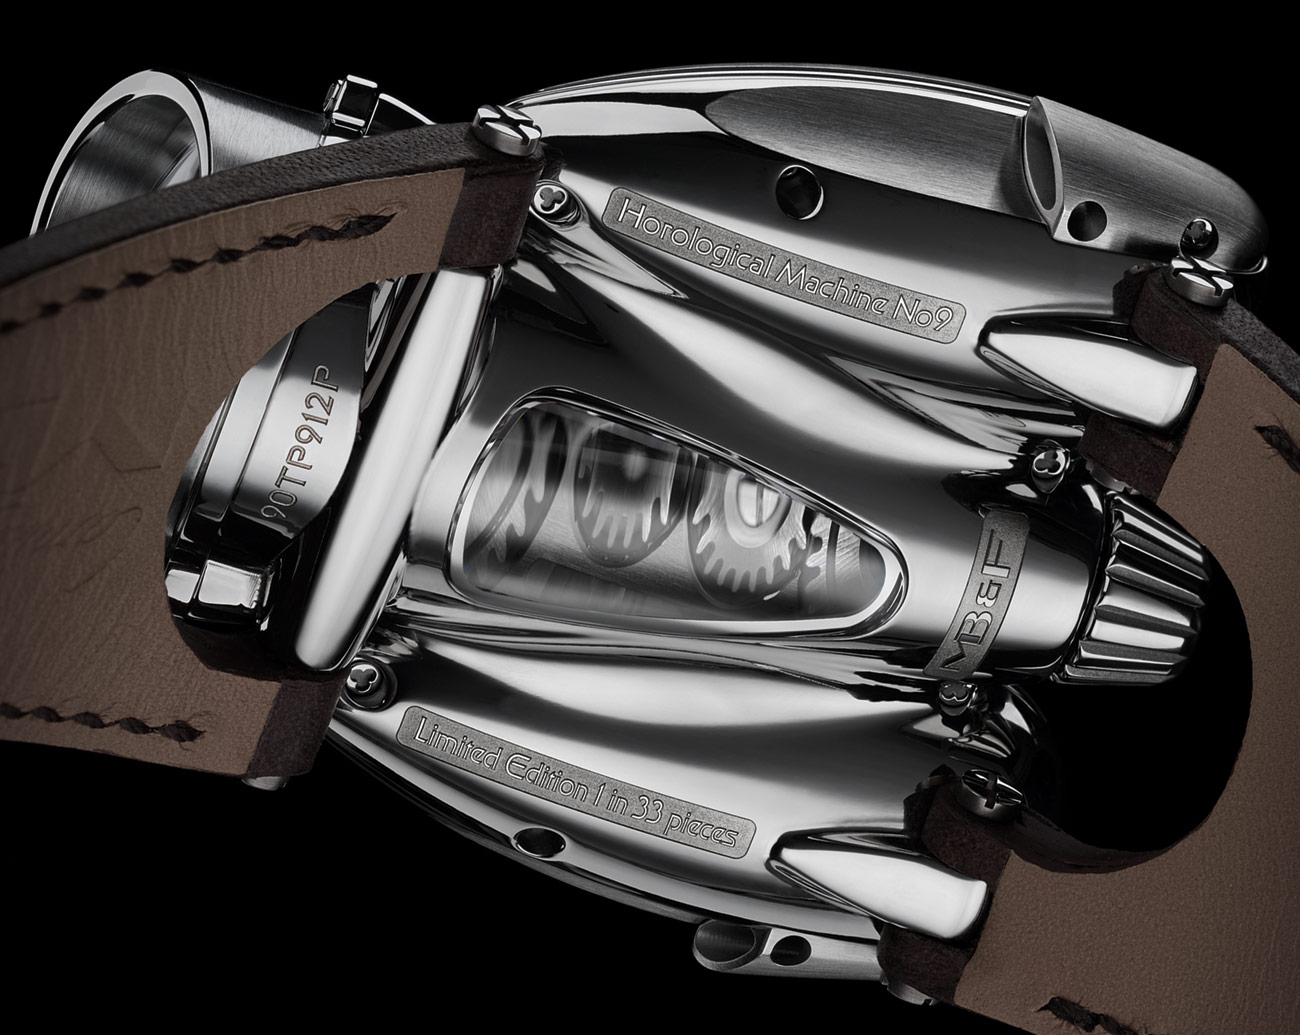 MB&F's new Horological Machine No. 9 Flow watches MBF-Horological-Machine-No-9-HM9-Flow-Air-Road-aBlogtoWatch-2